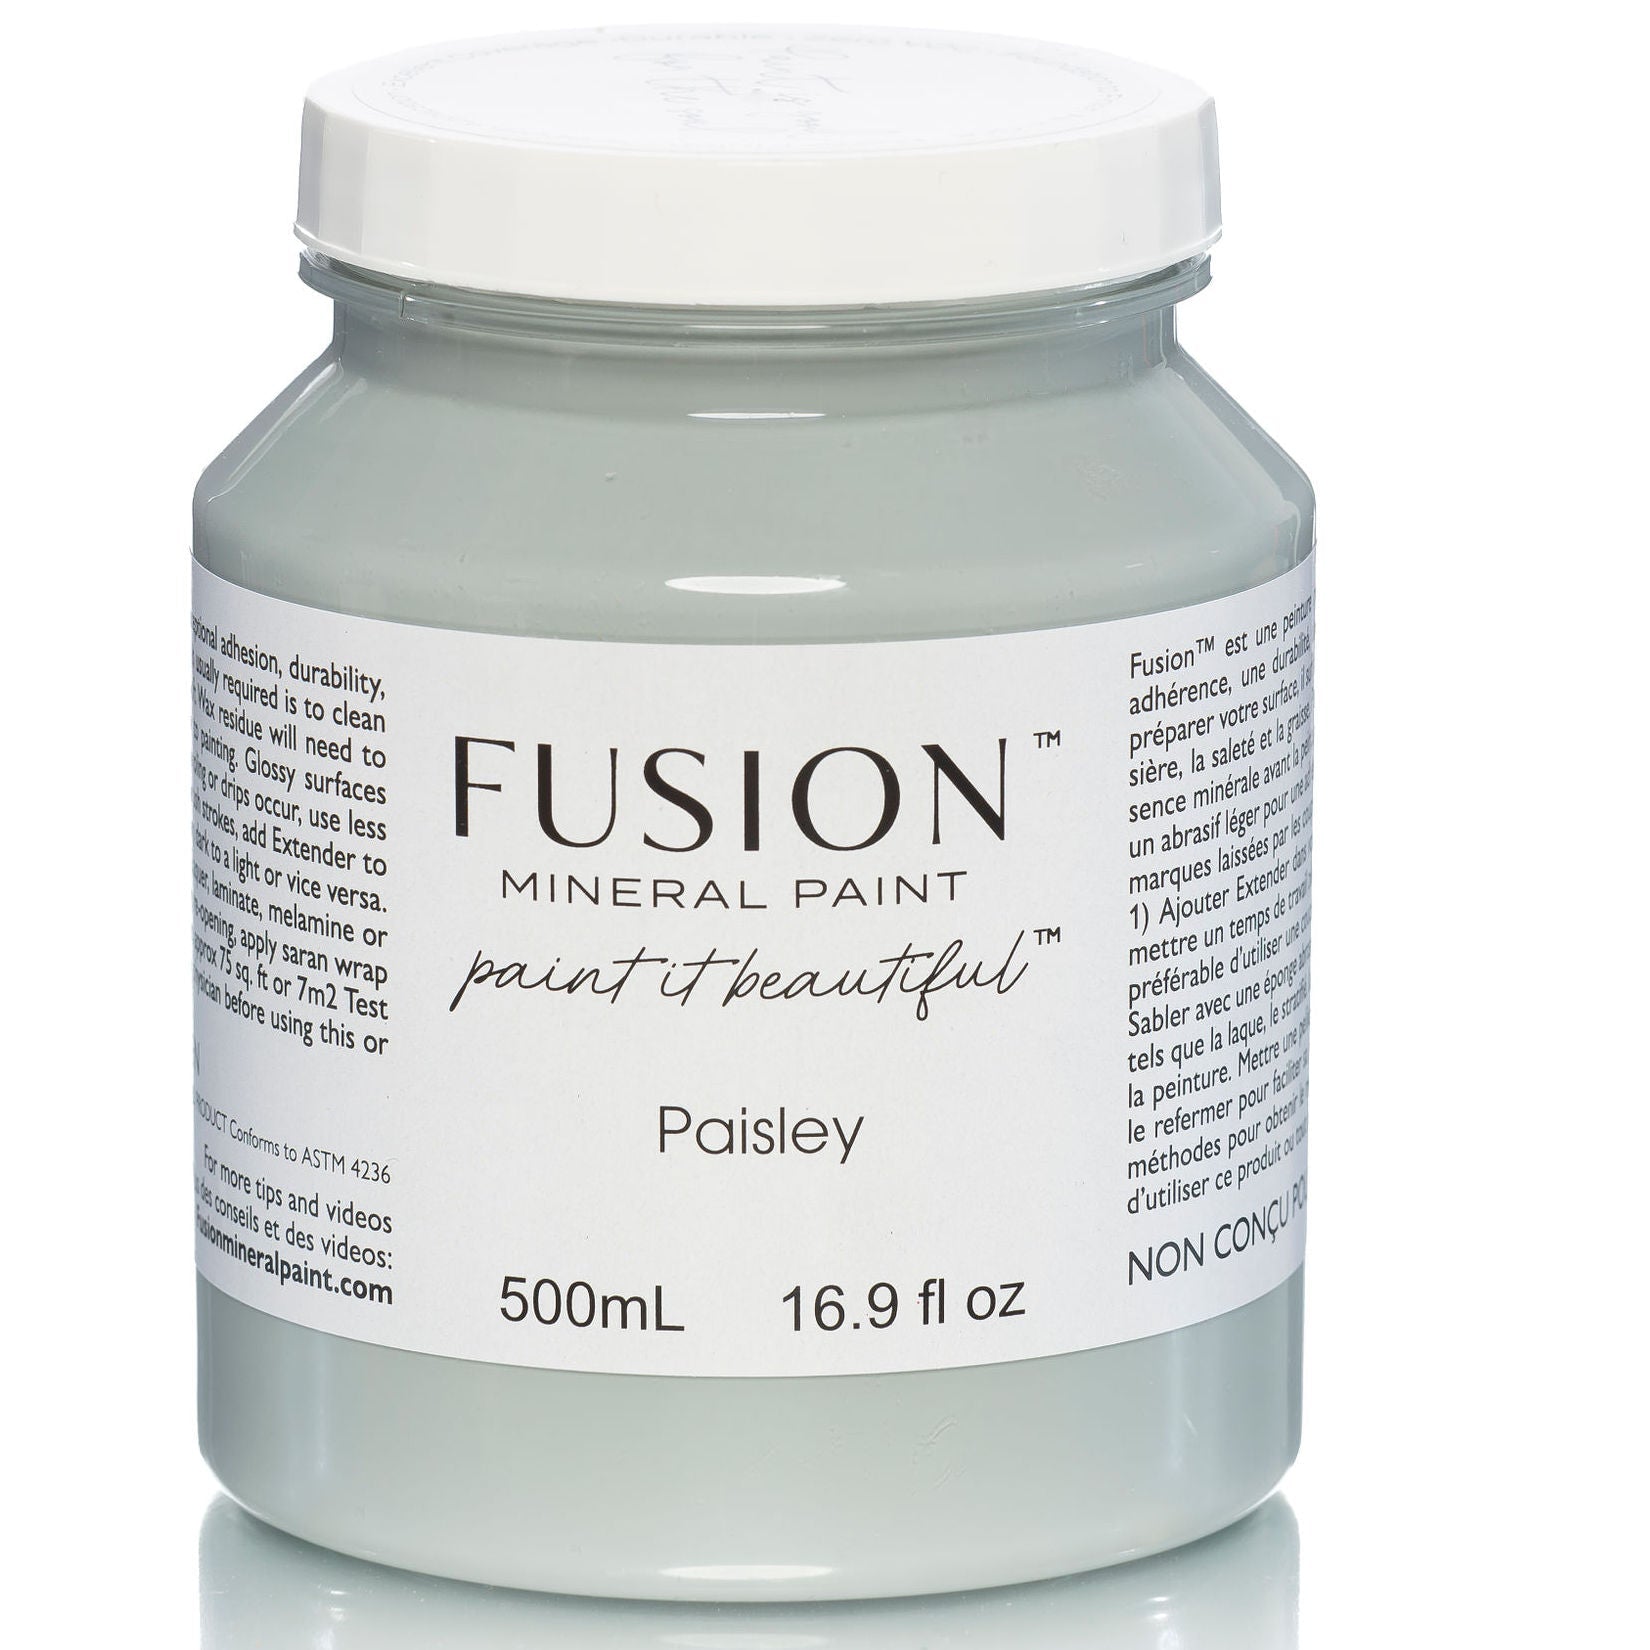 Fusion Mineral Paint in Paisley - Painted